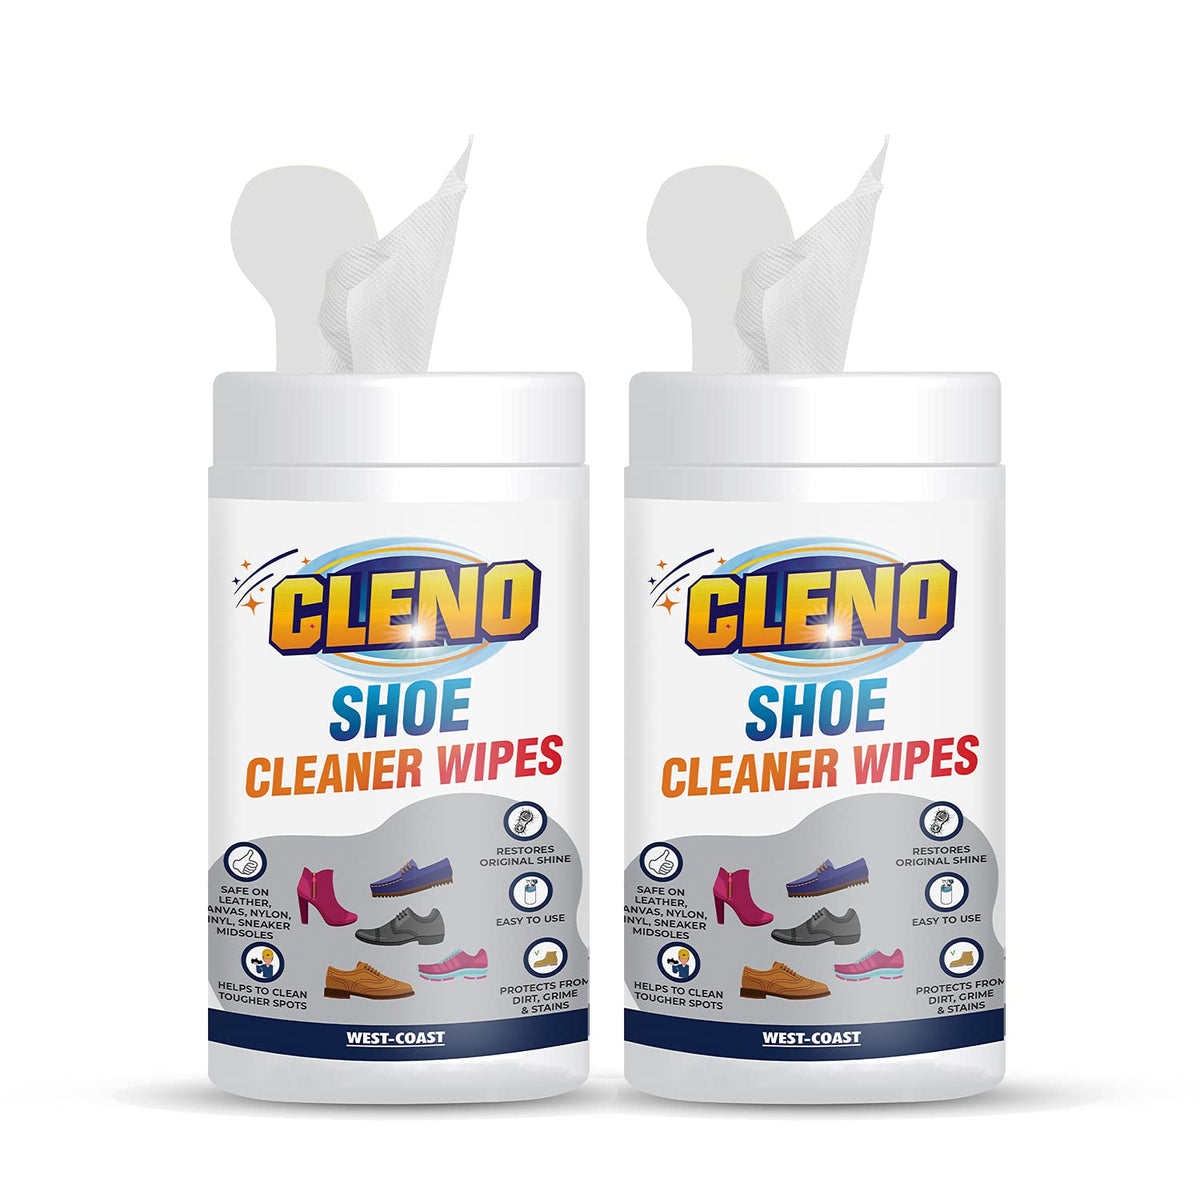 Cleno Shoe Cleaner Wet Wipes for Loafers, Sandals, Slippers, Traditional Footwear, Athletic, Sneakers, White & Golf-Tennis Shoes, Scrub Off Dirt, Mud, Grass Stains - 50 Wipes (Pack of 2,Ready to Use)